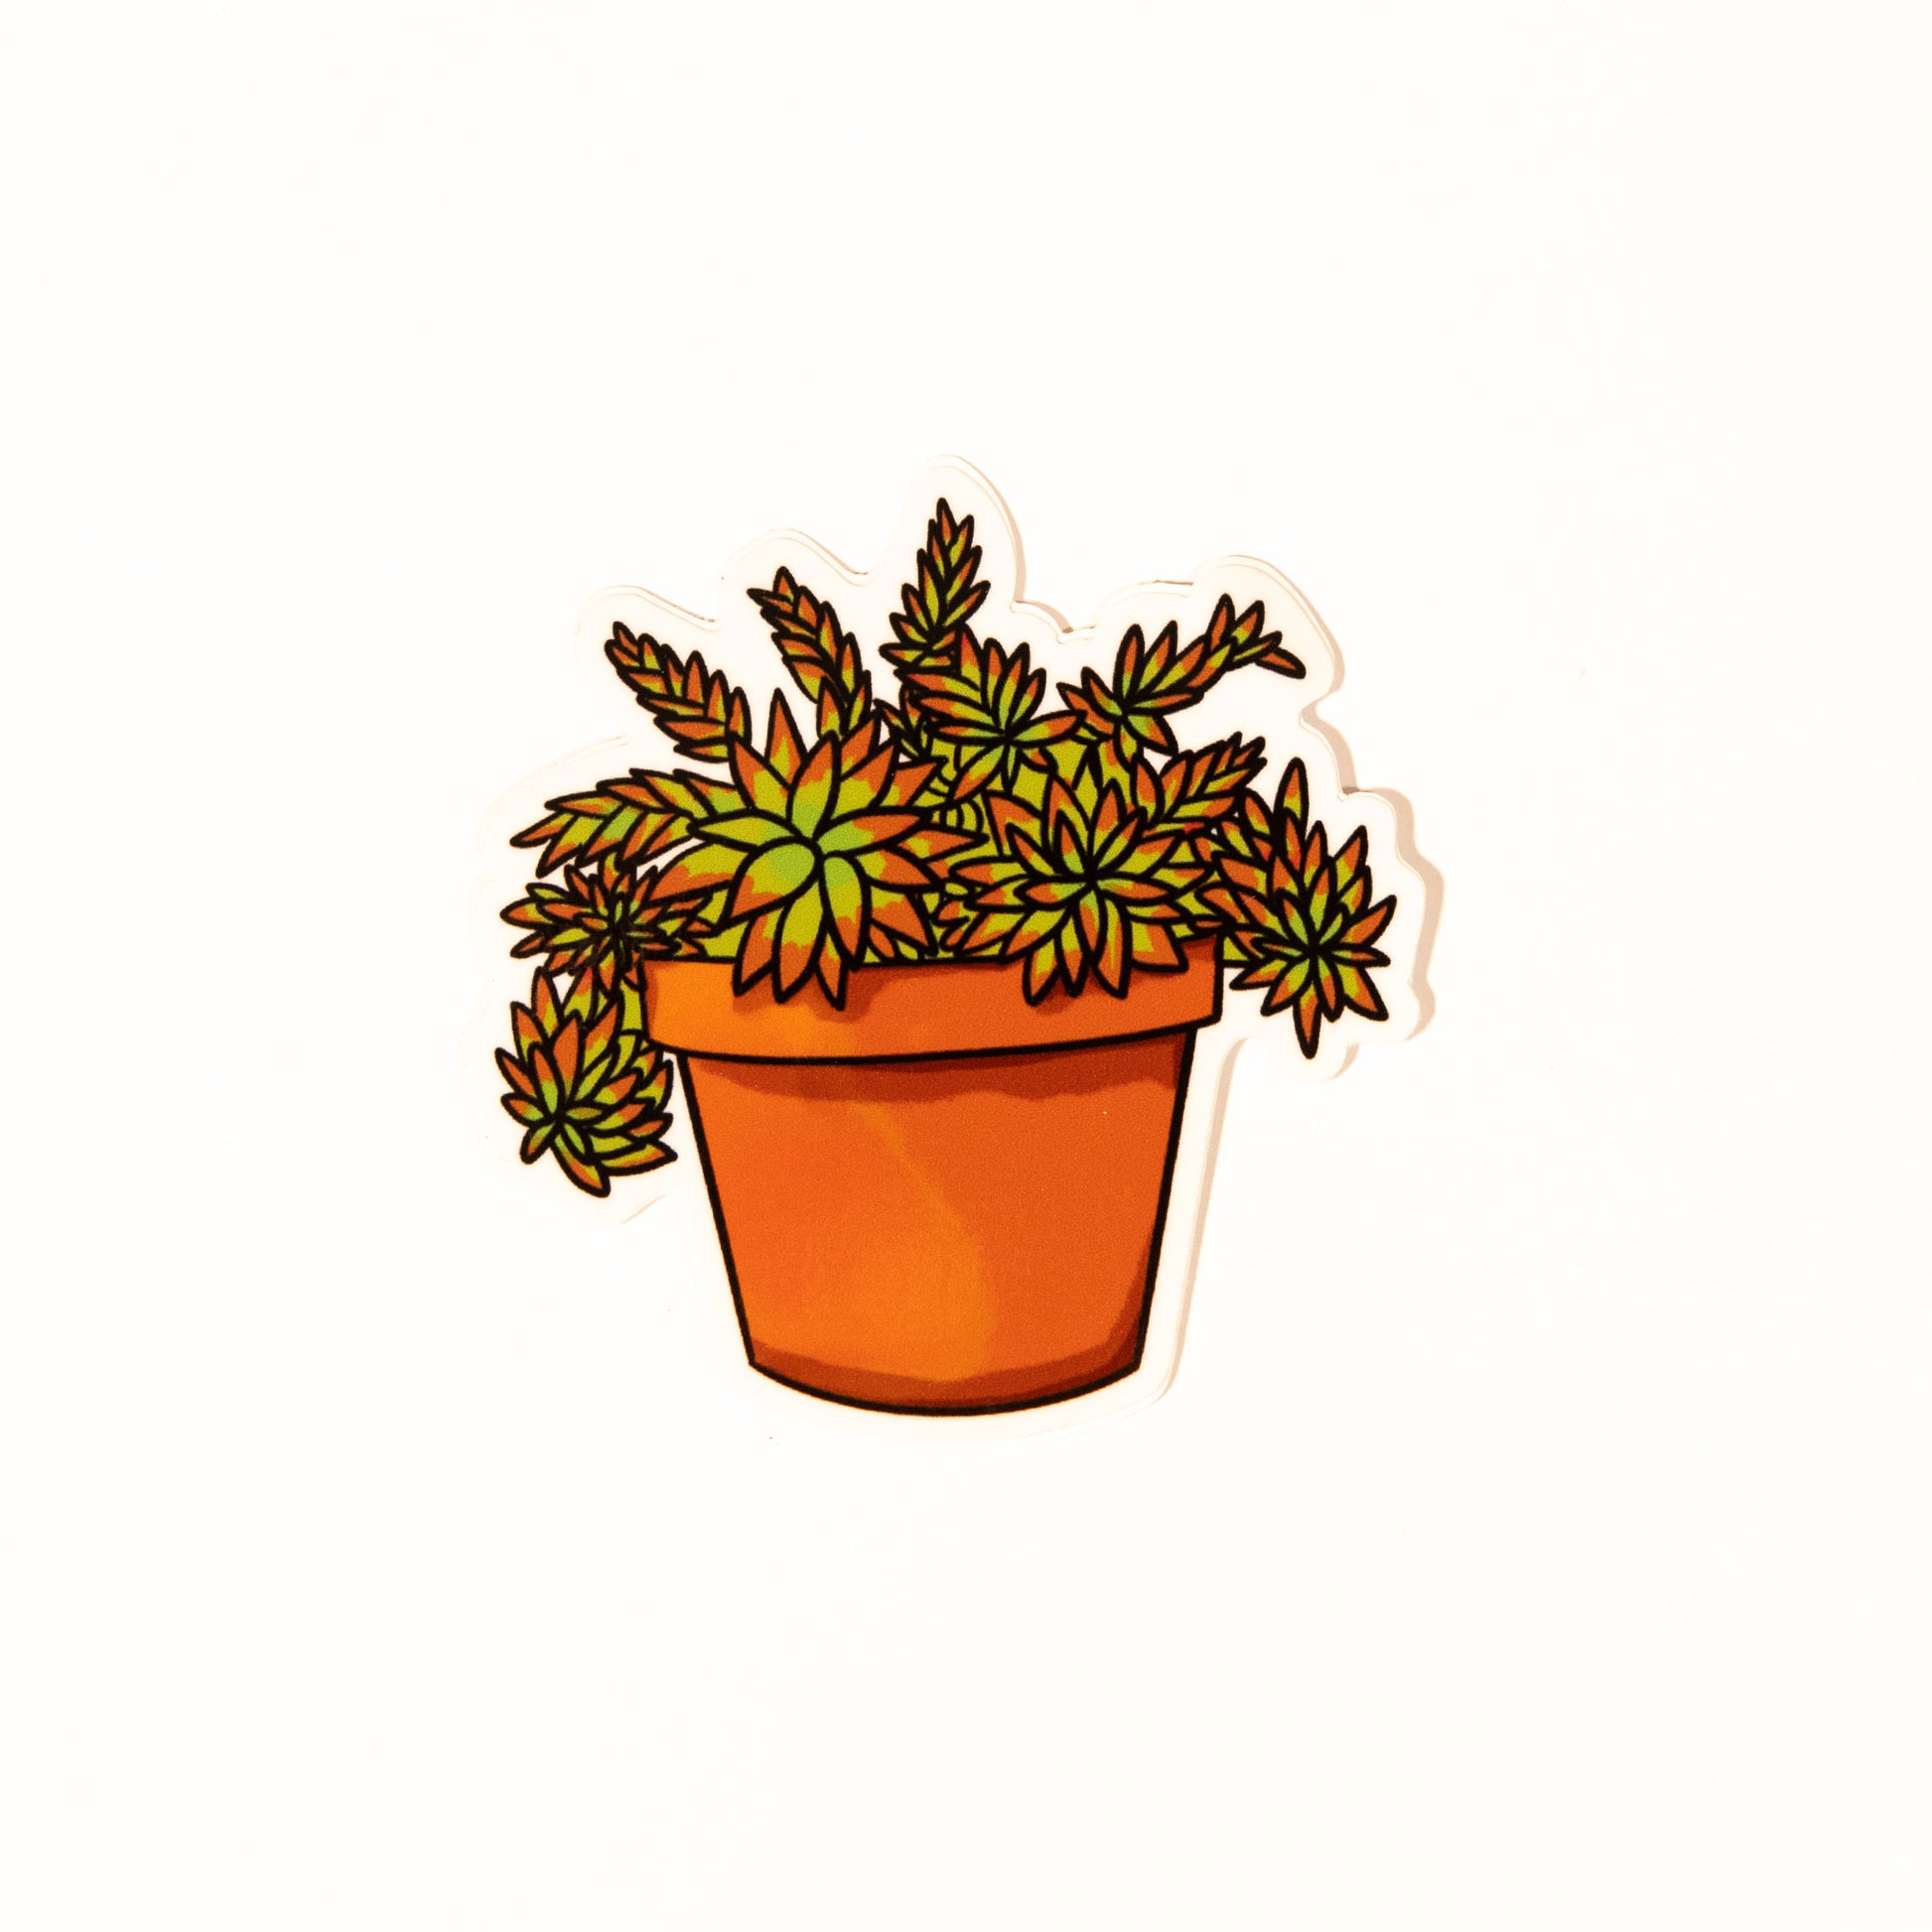 An illustration of a Crassula capitella succulent as a sticker. The sticker shape is cut to the outline of the illustration. The succulent in the drawing is in a terra cotta pot.